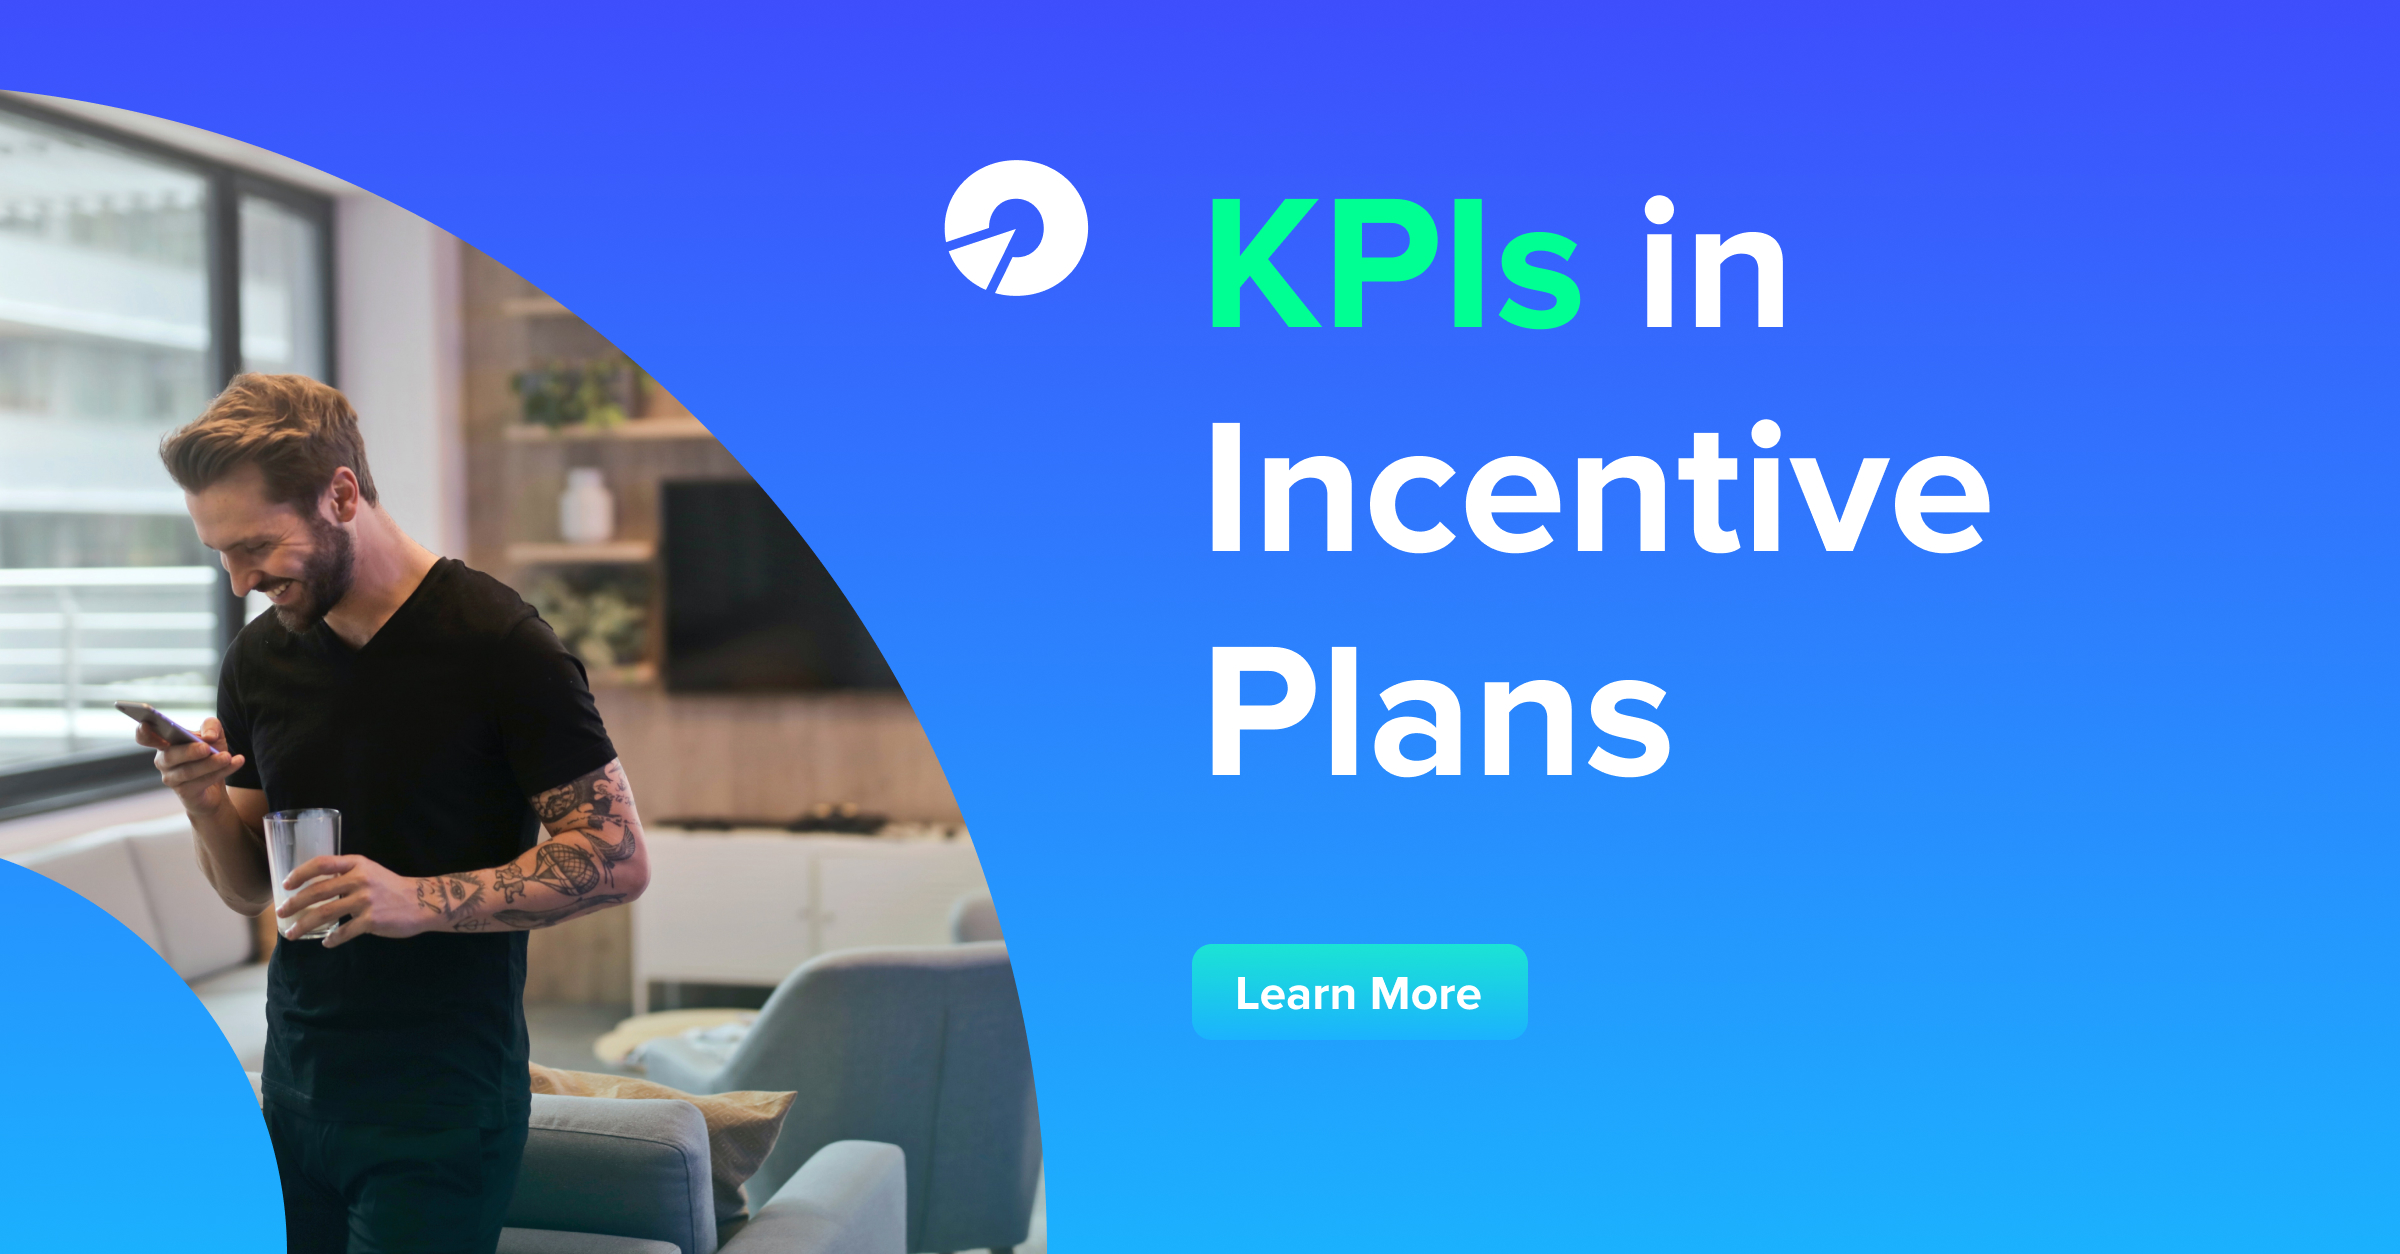 KPIs in Incentive Plans